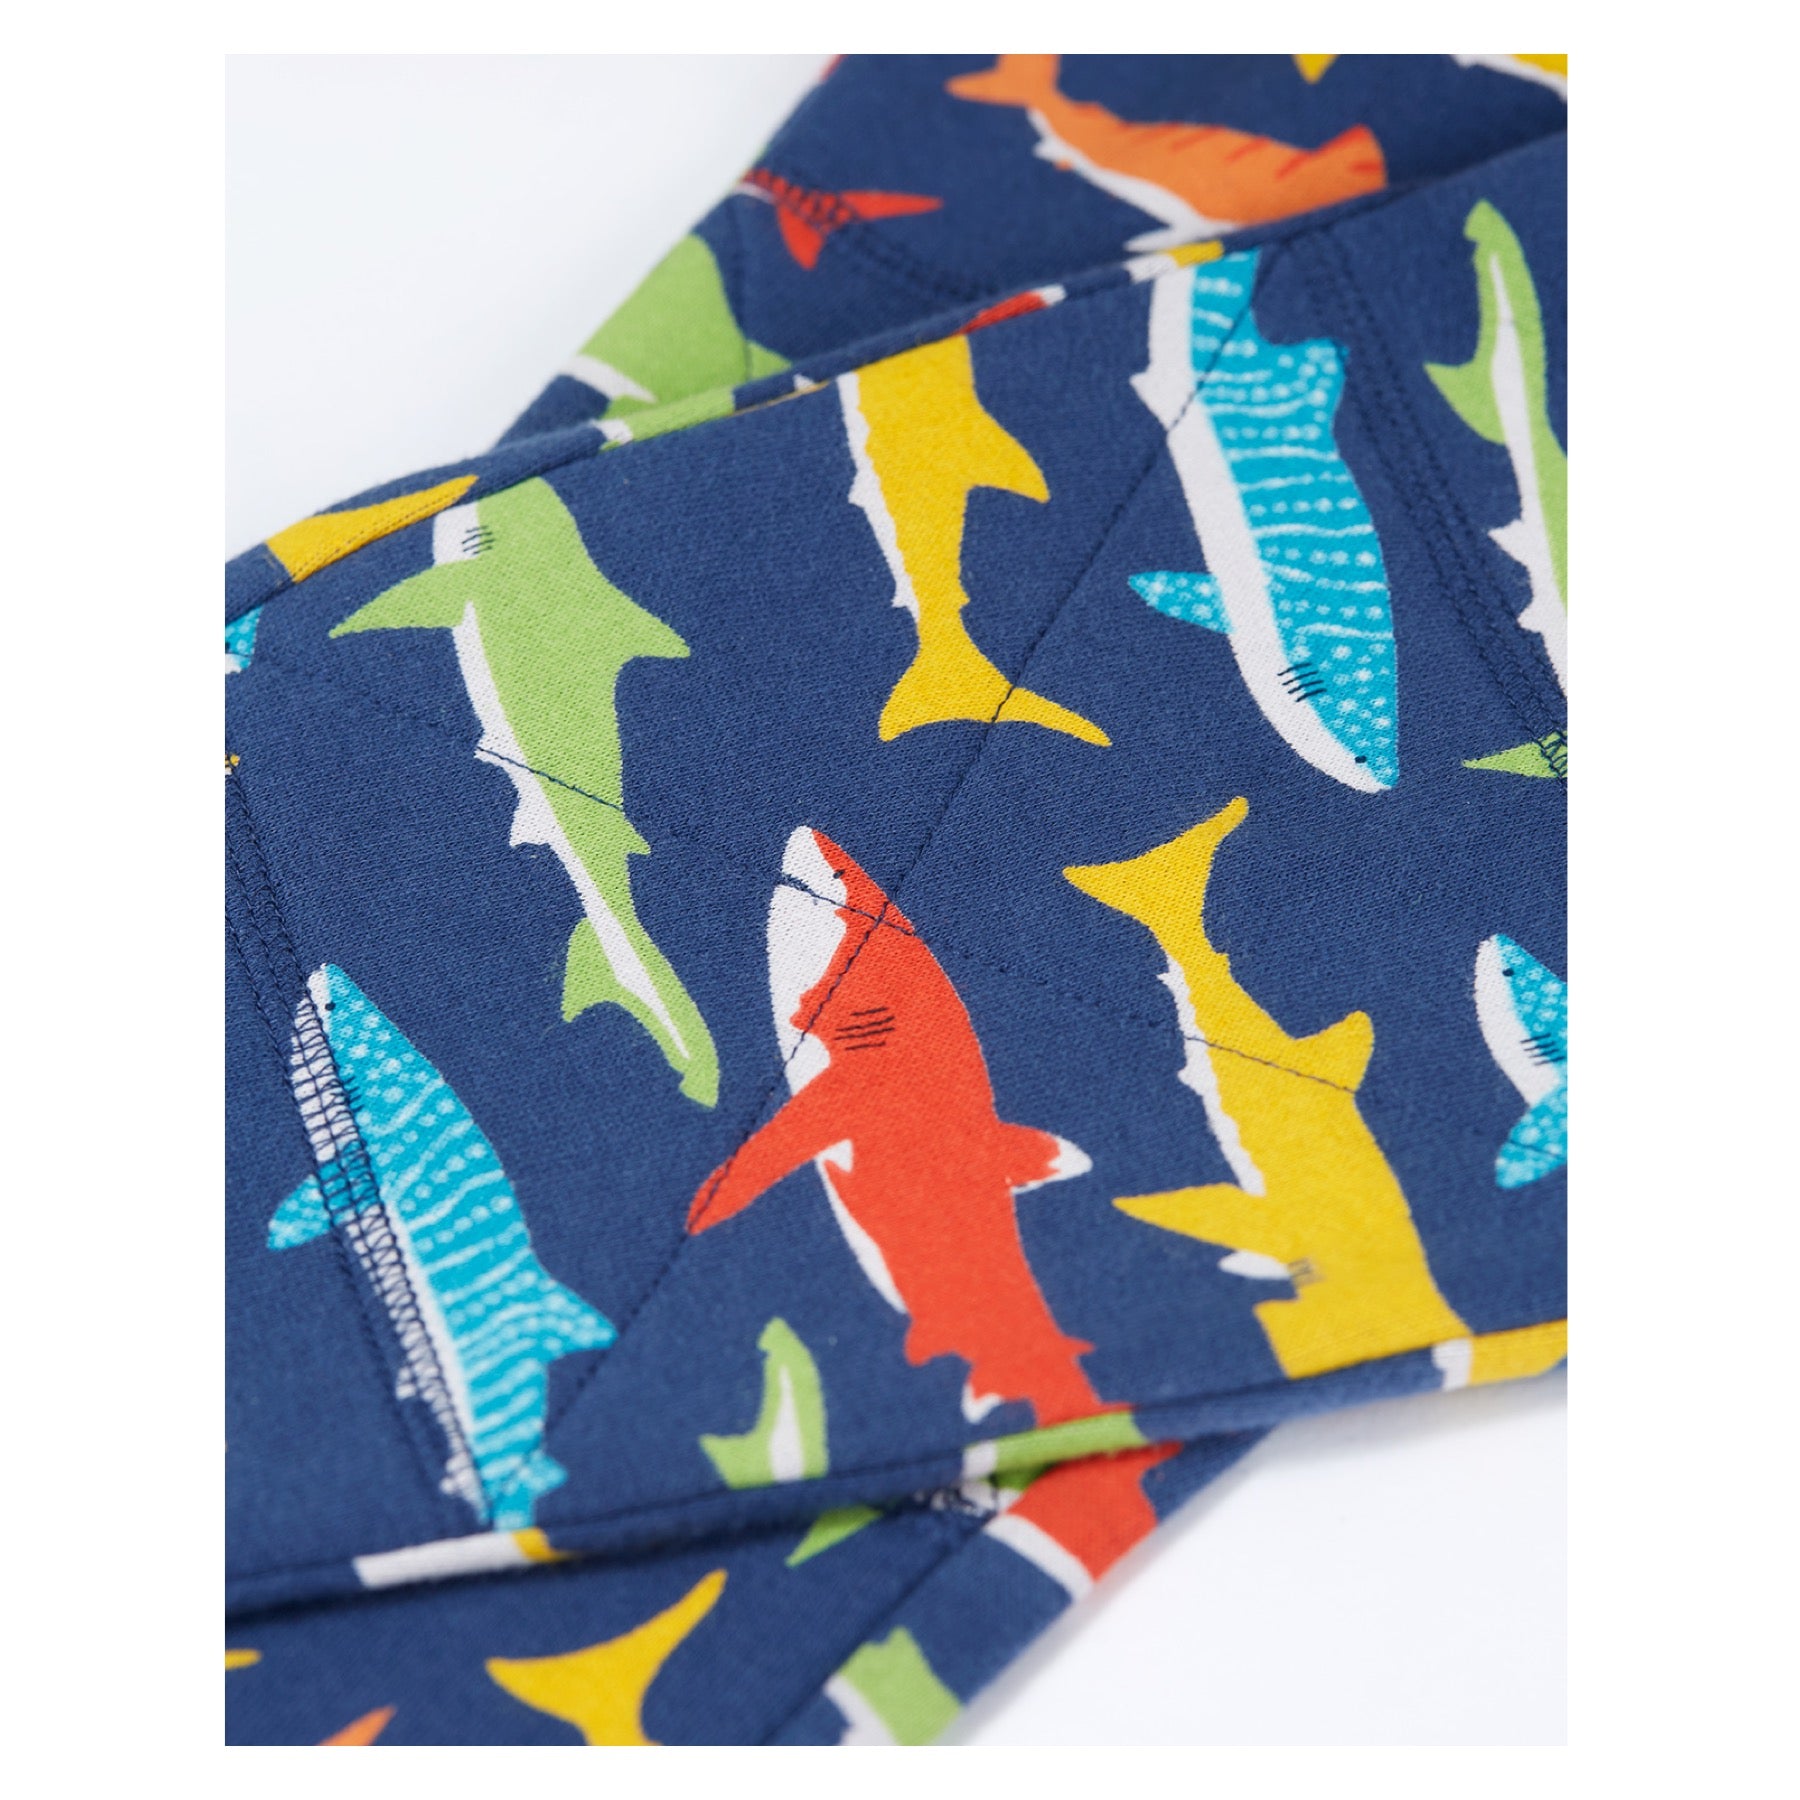 Frugi Switch Printed Snug Joggers Shiver of Sharks